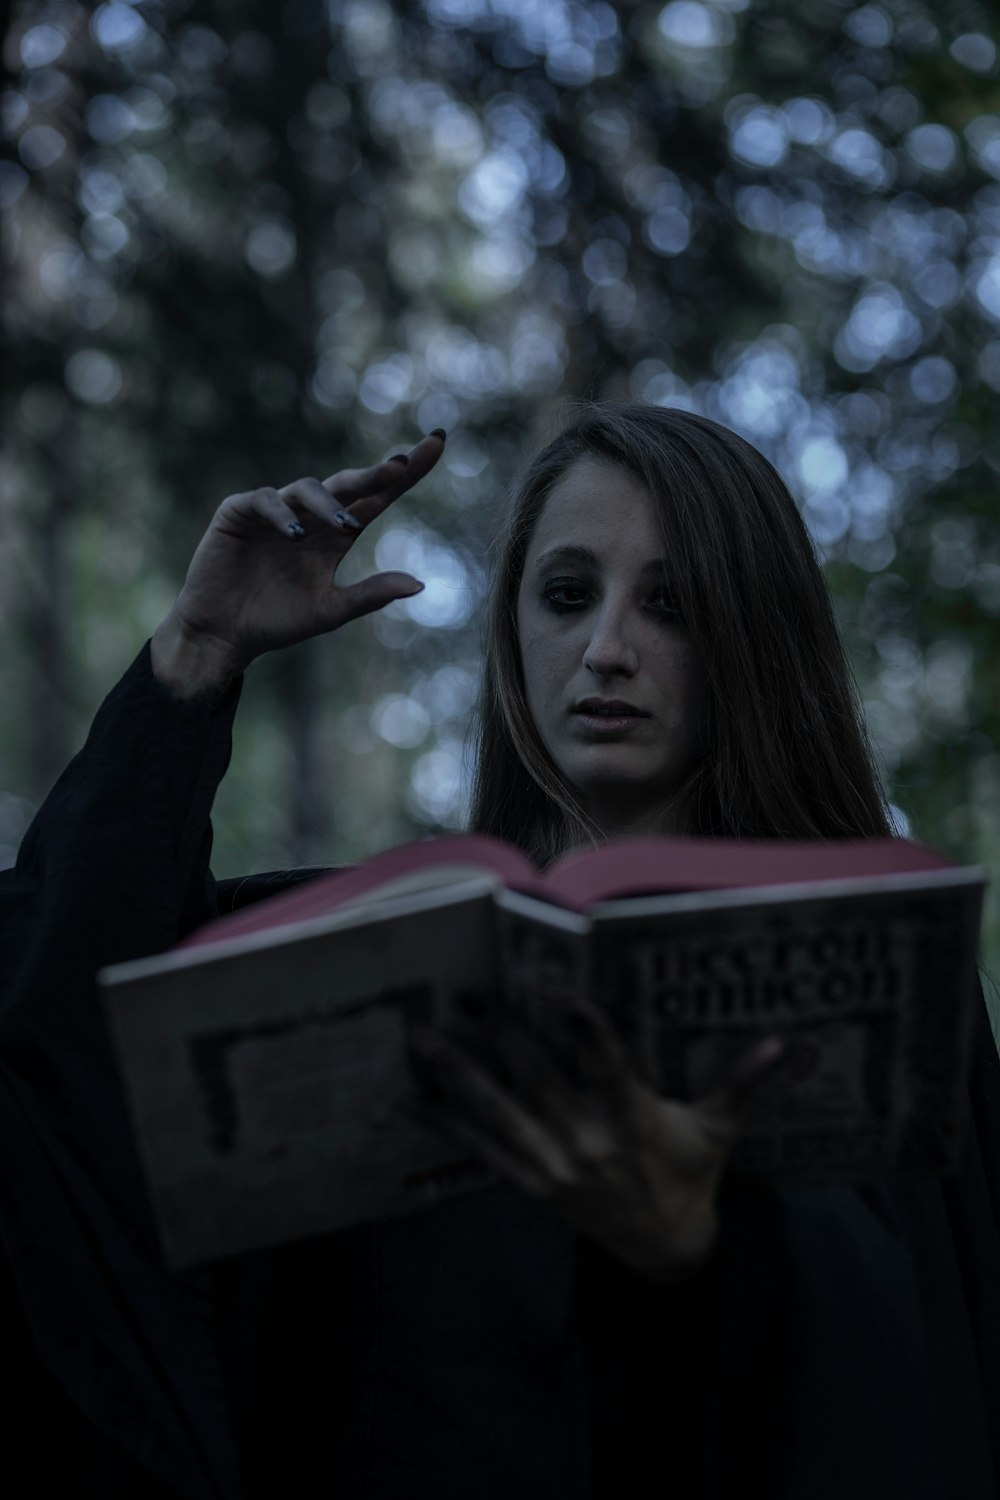 a woman reading a book in a dark forest